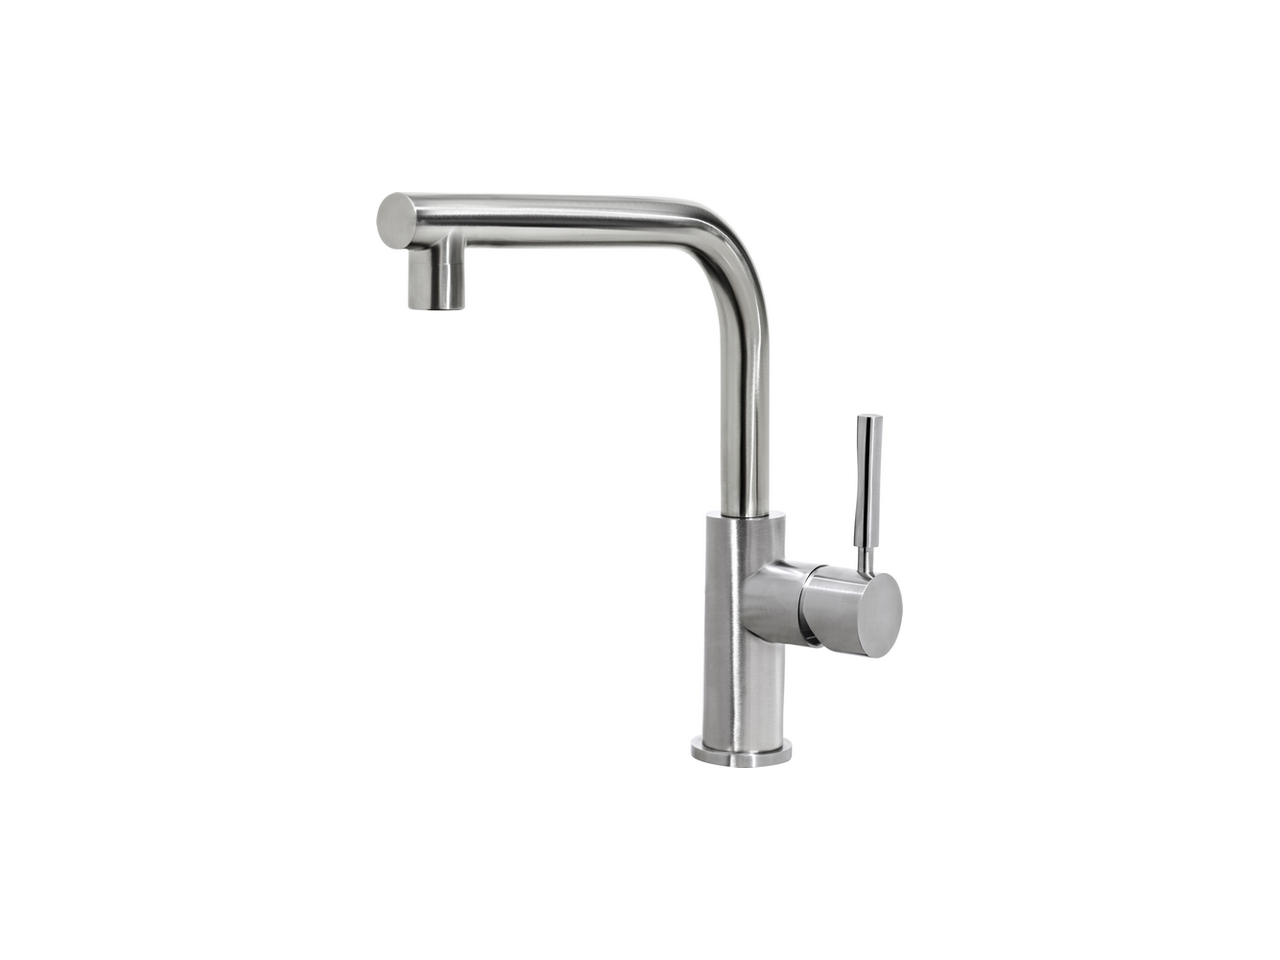 CisalSingle lever sink mixer, STAINLESS STEEL made KITCHEN_LC000050